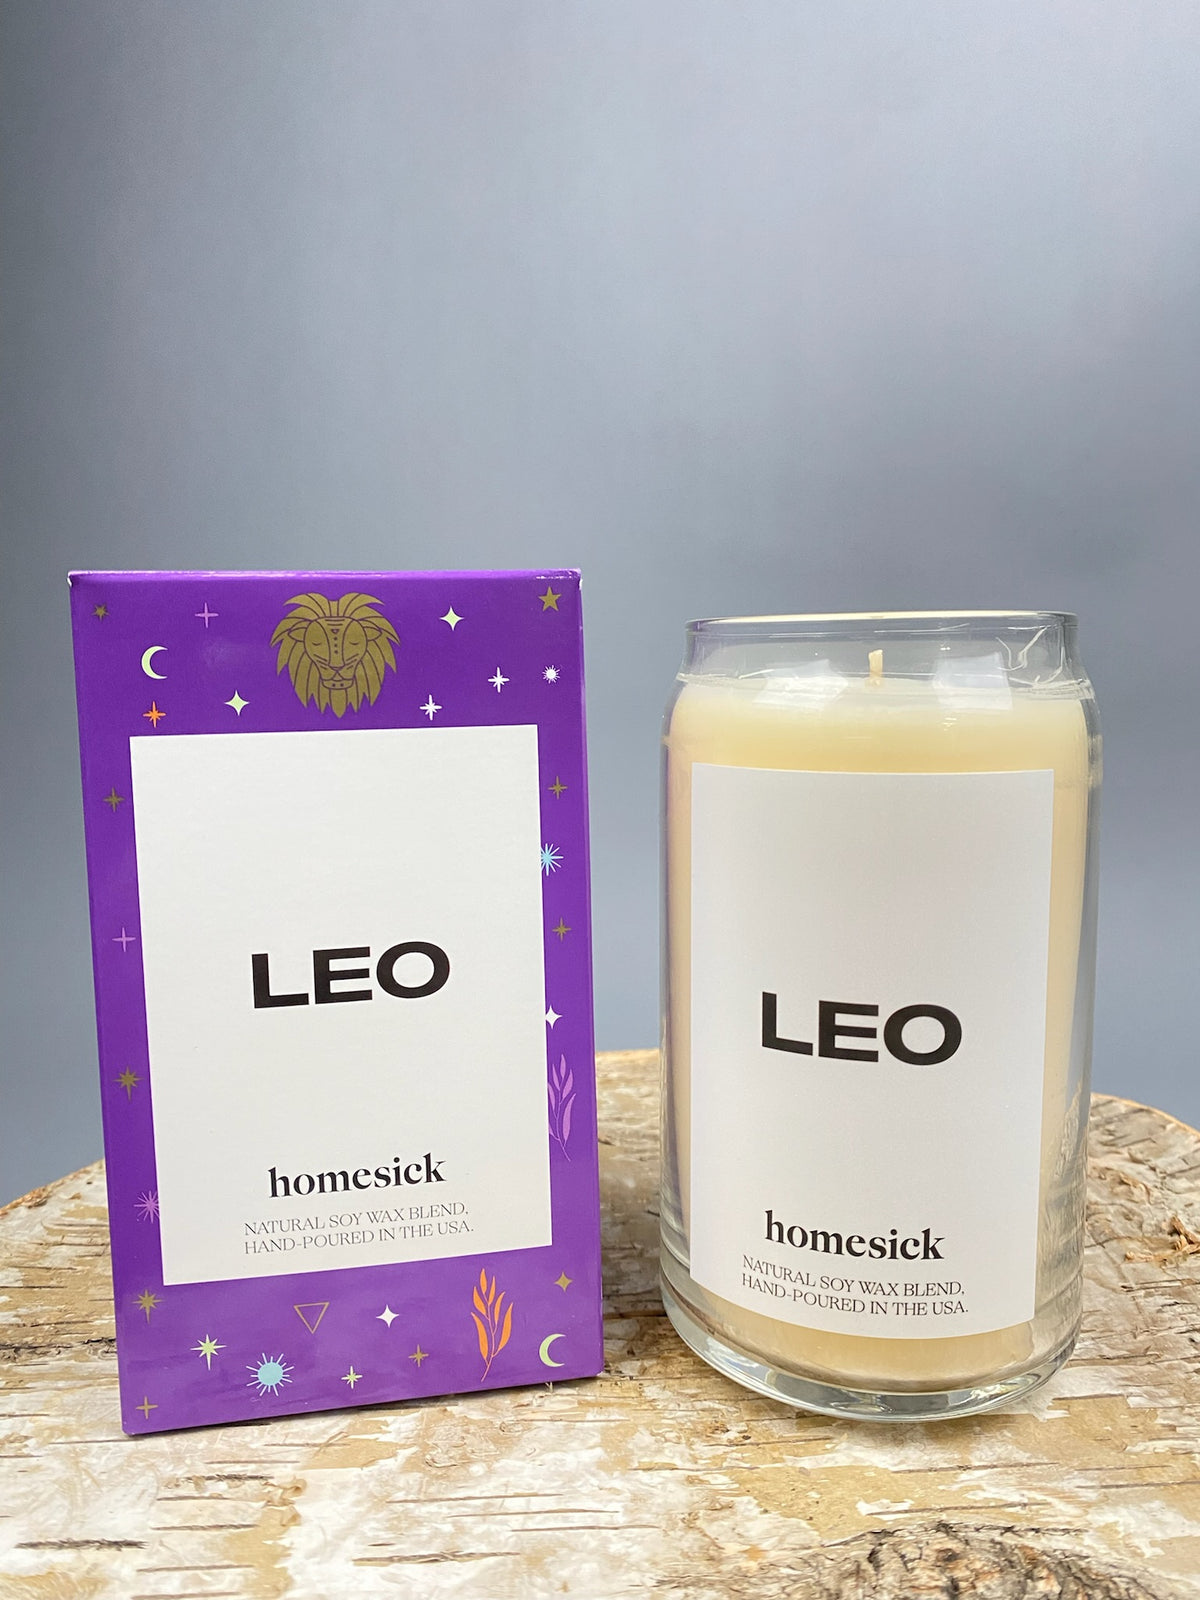 Homesick Leo candle - Trendy Candles at Lush Fashion Lounge Boutique in Oklahoma City